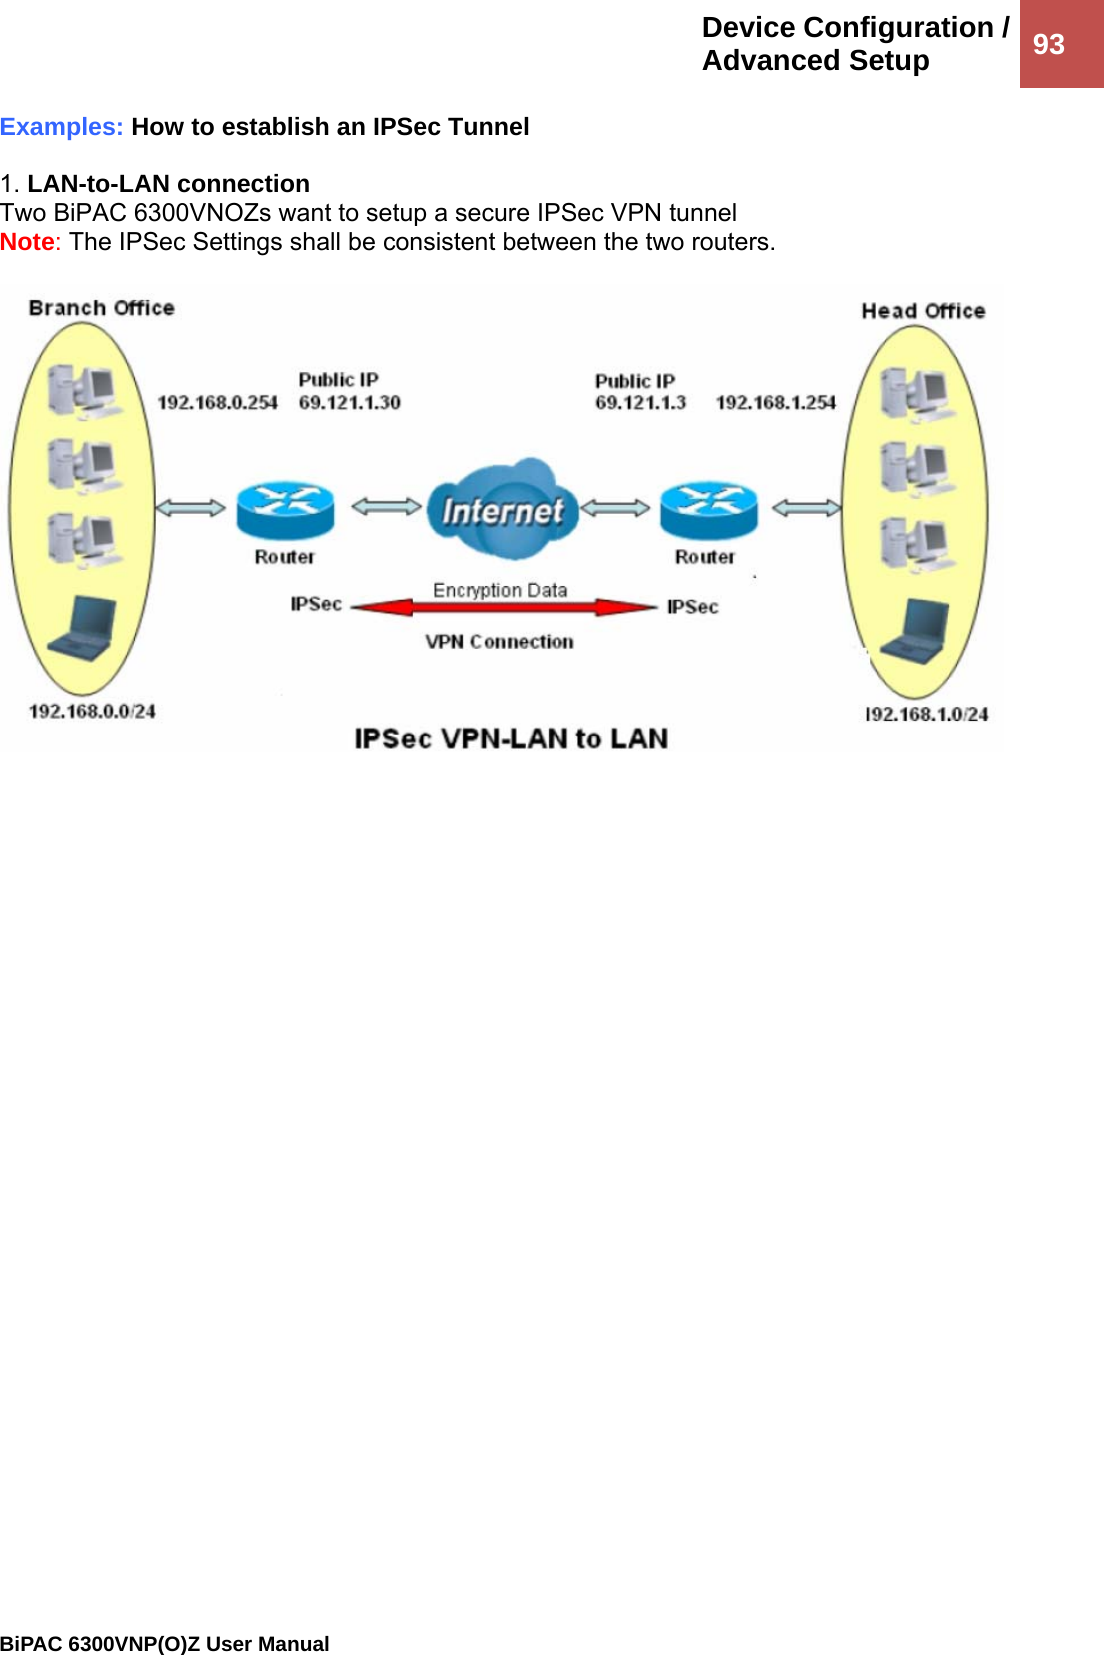 Device Configuration /Advanced Setup  93                                                BiPAC 6300VNP(O)Z User Manual  Examples: How to establish an IPSec Tunnel  1. LAN-to-LAN connection Two BiPAC 6300VNOZs want to setup a secure IPSec VPN tunnel  Note: The IPSec Settings shall be consistent between the two routers.    